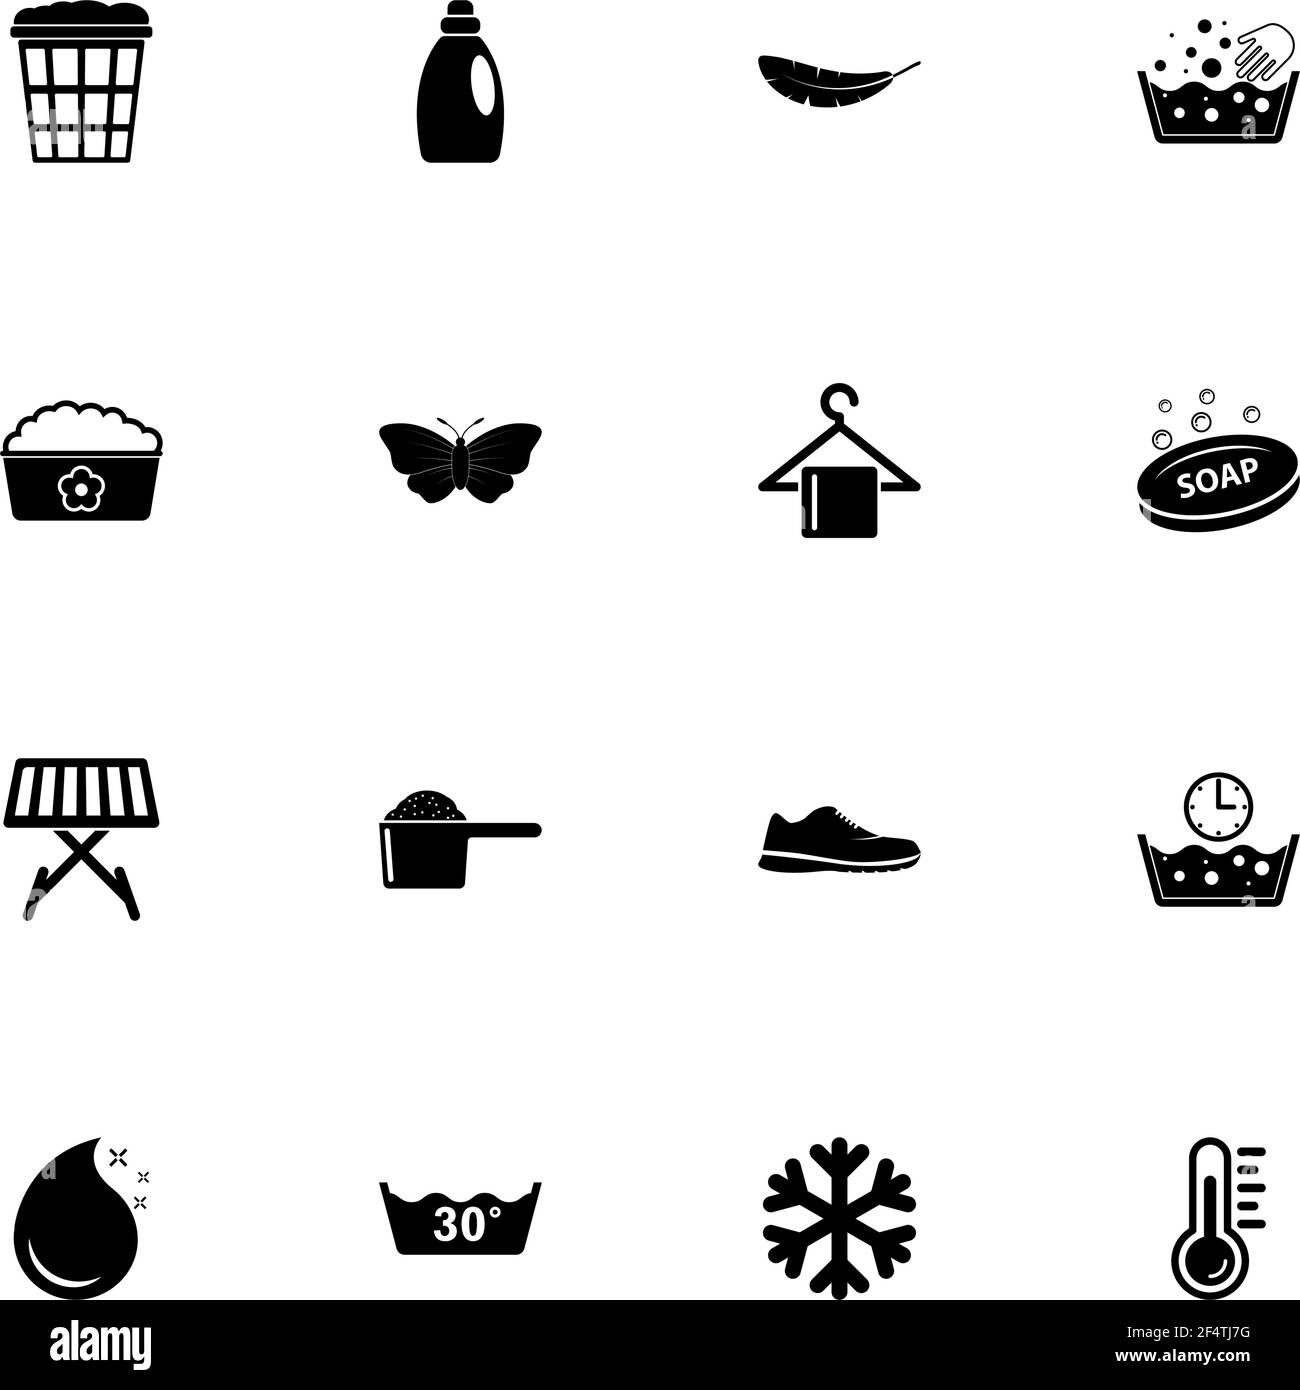 Washing icon - Expand to any size - Change to any colour. Perfect Flat Vector Contains such Icons as soap, bottle, butterfly, dryer, laundry basket, p Stock Vector